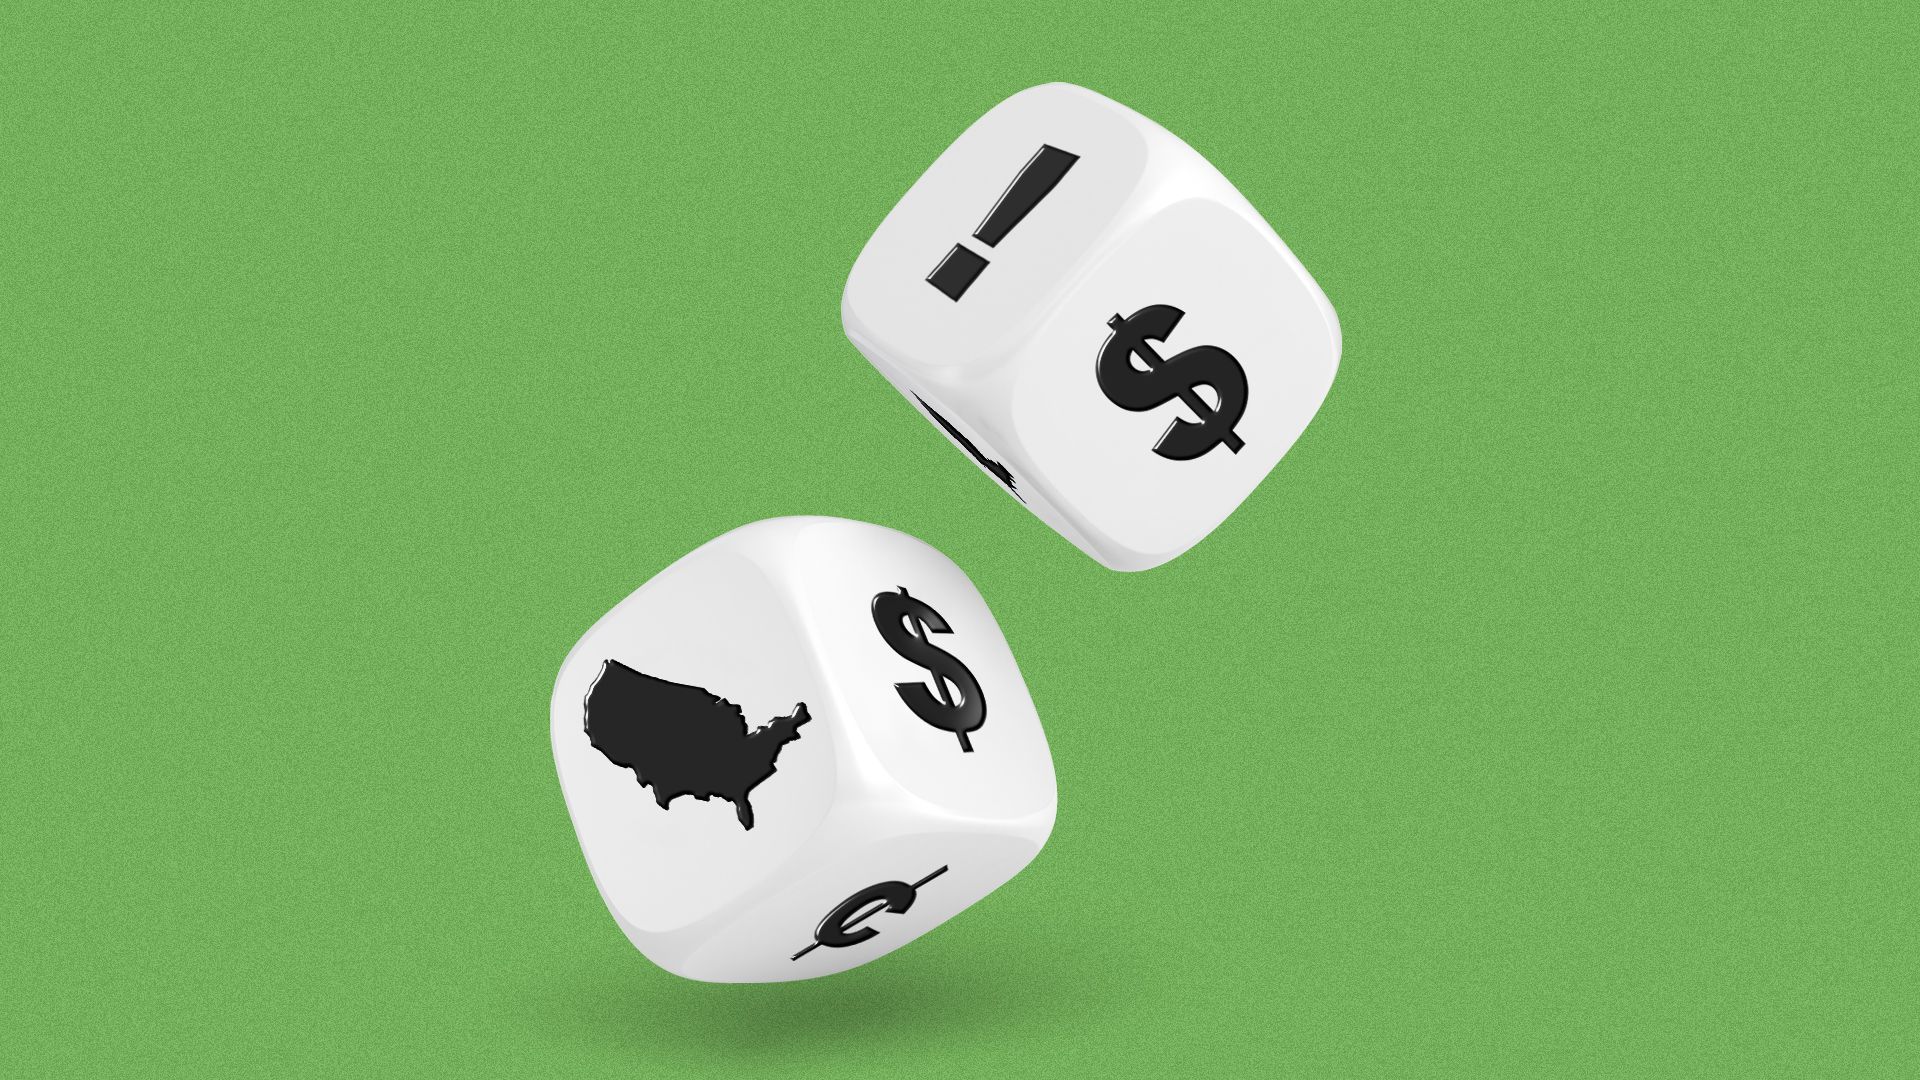 Illustration of two dice with dollar and cent signs, exclamation points and an outline of America along each side